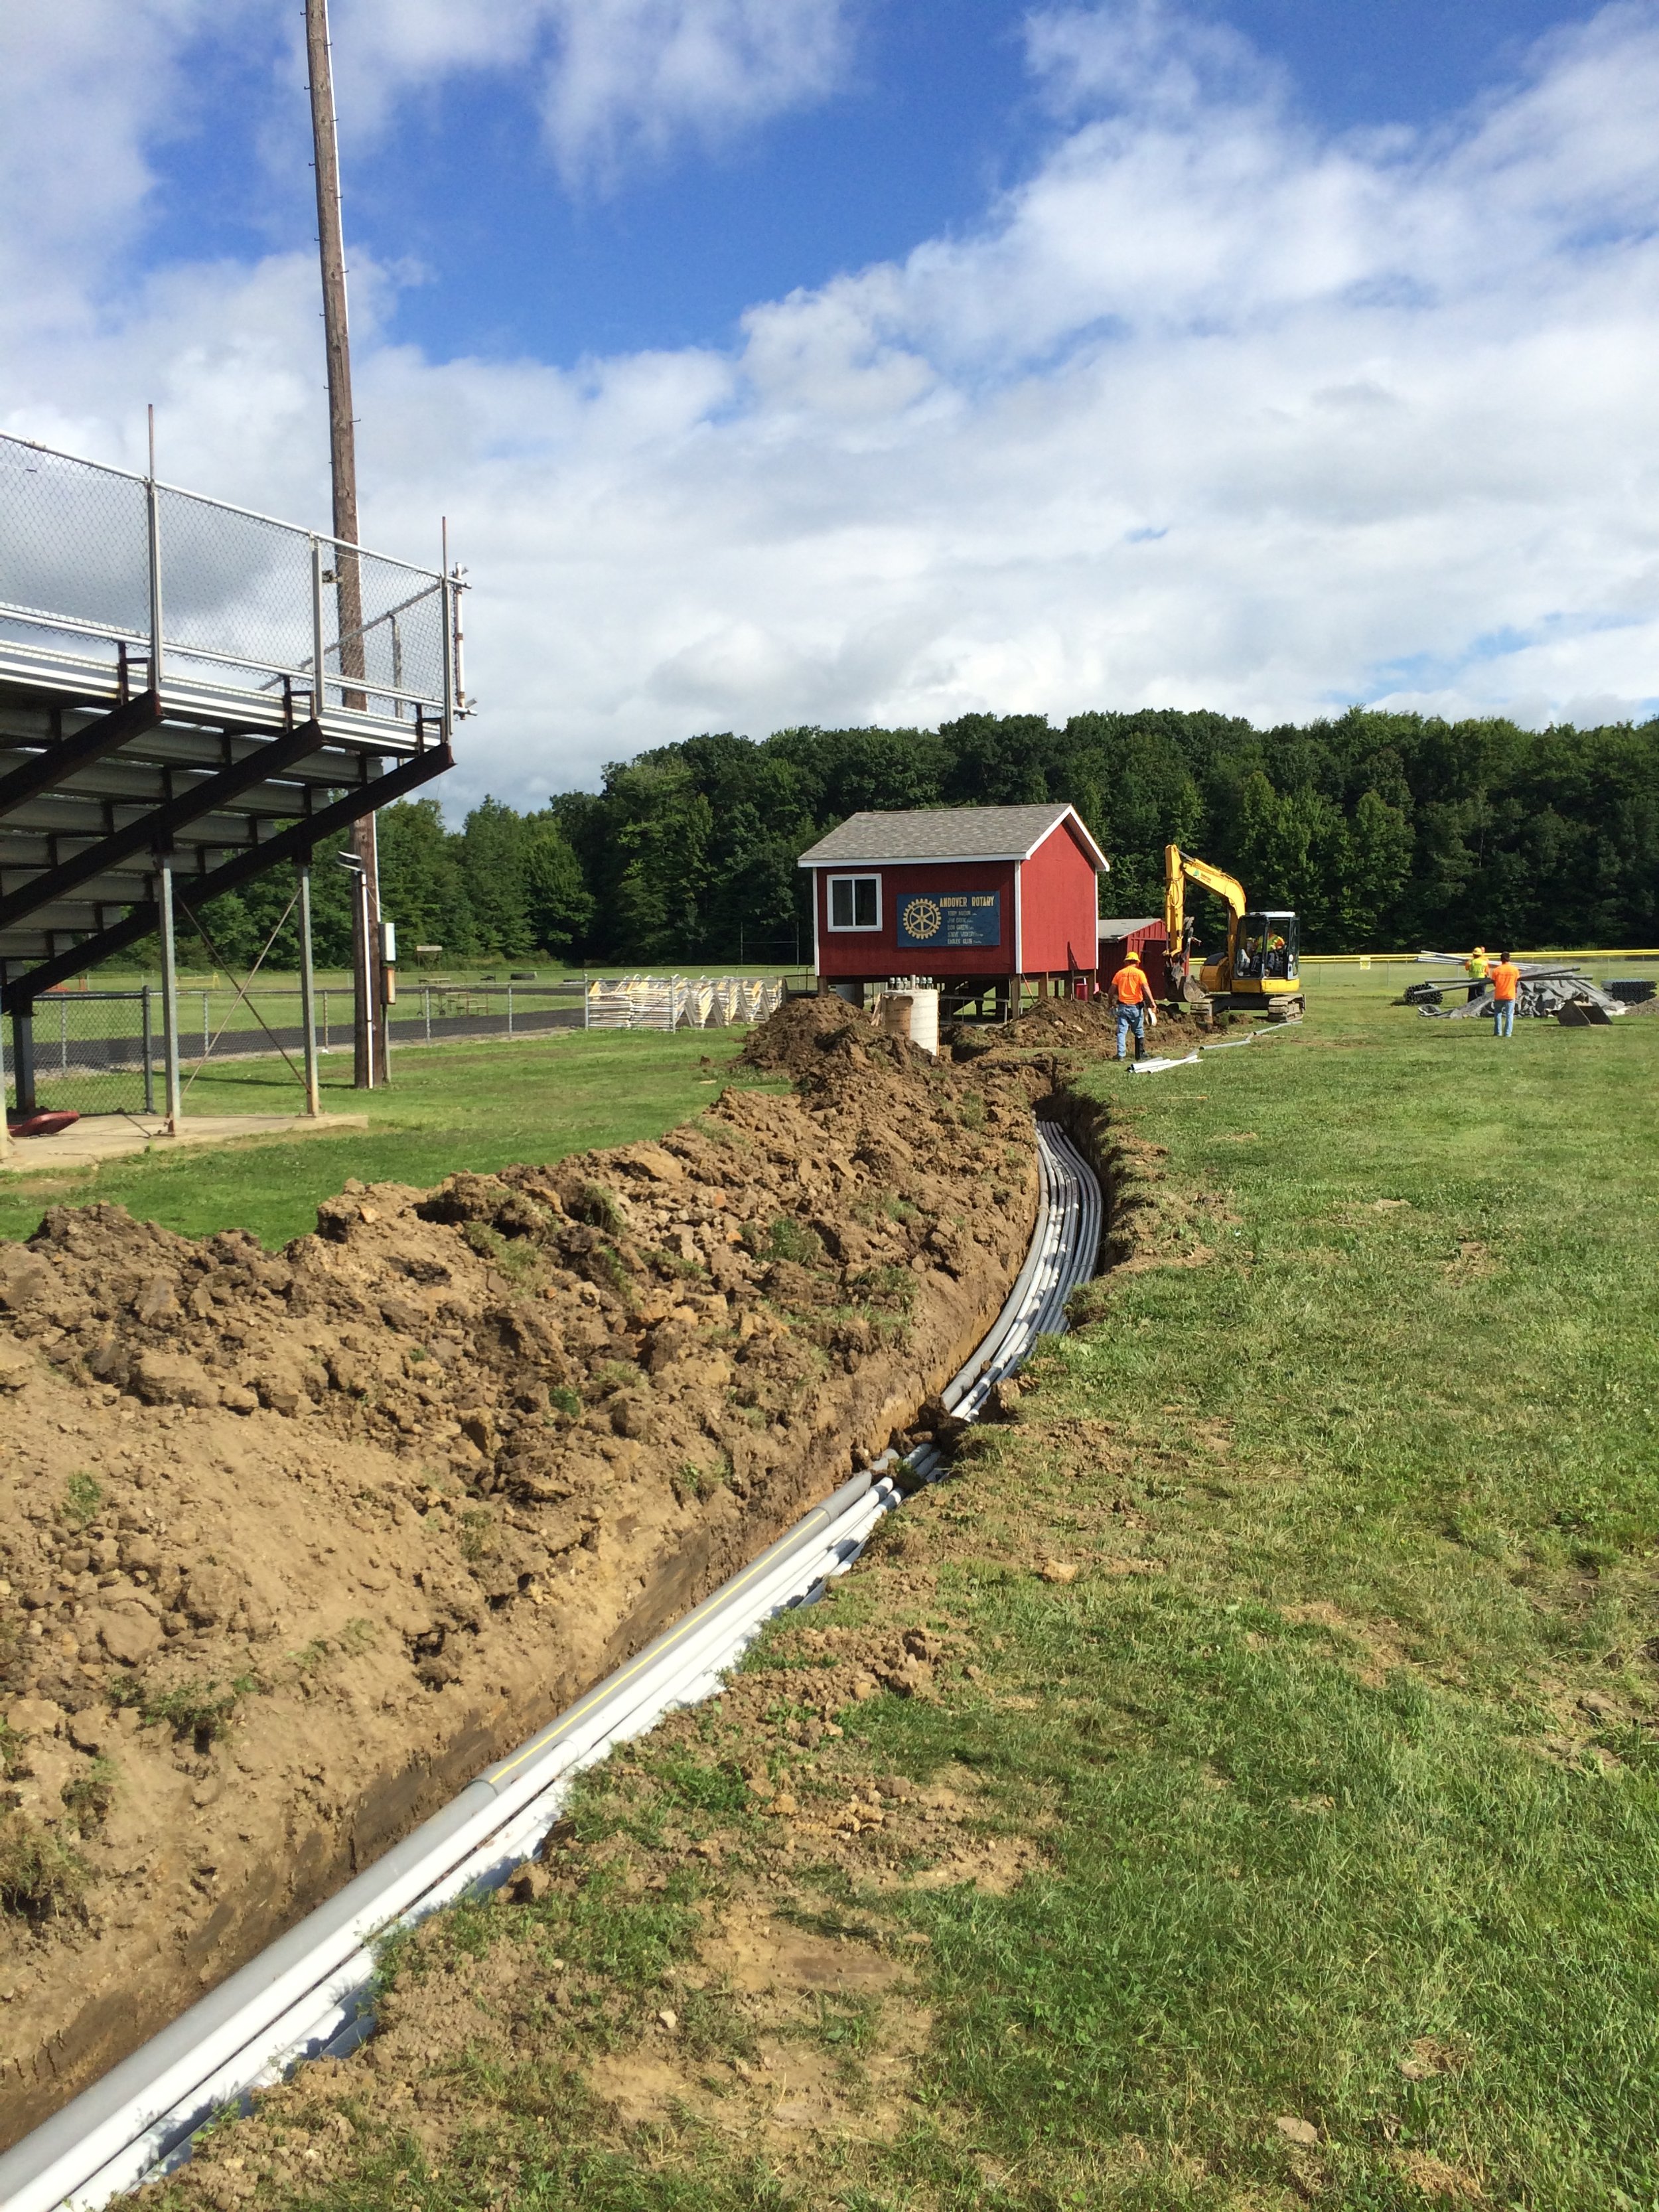 Typical open trench project for electrical upgrade